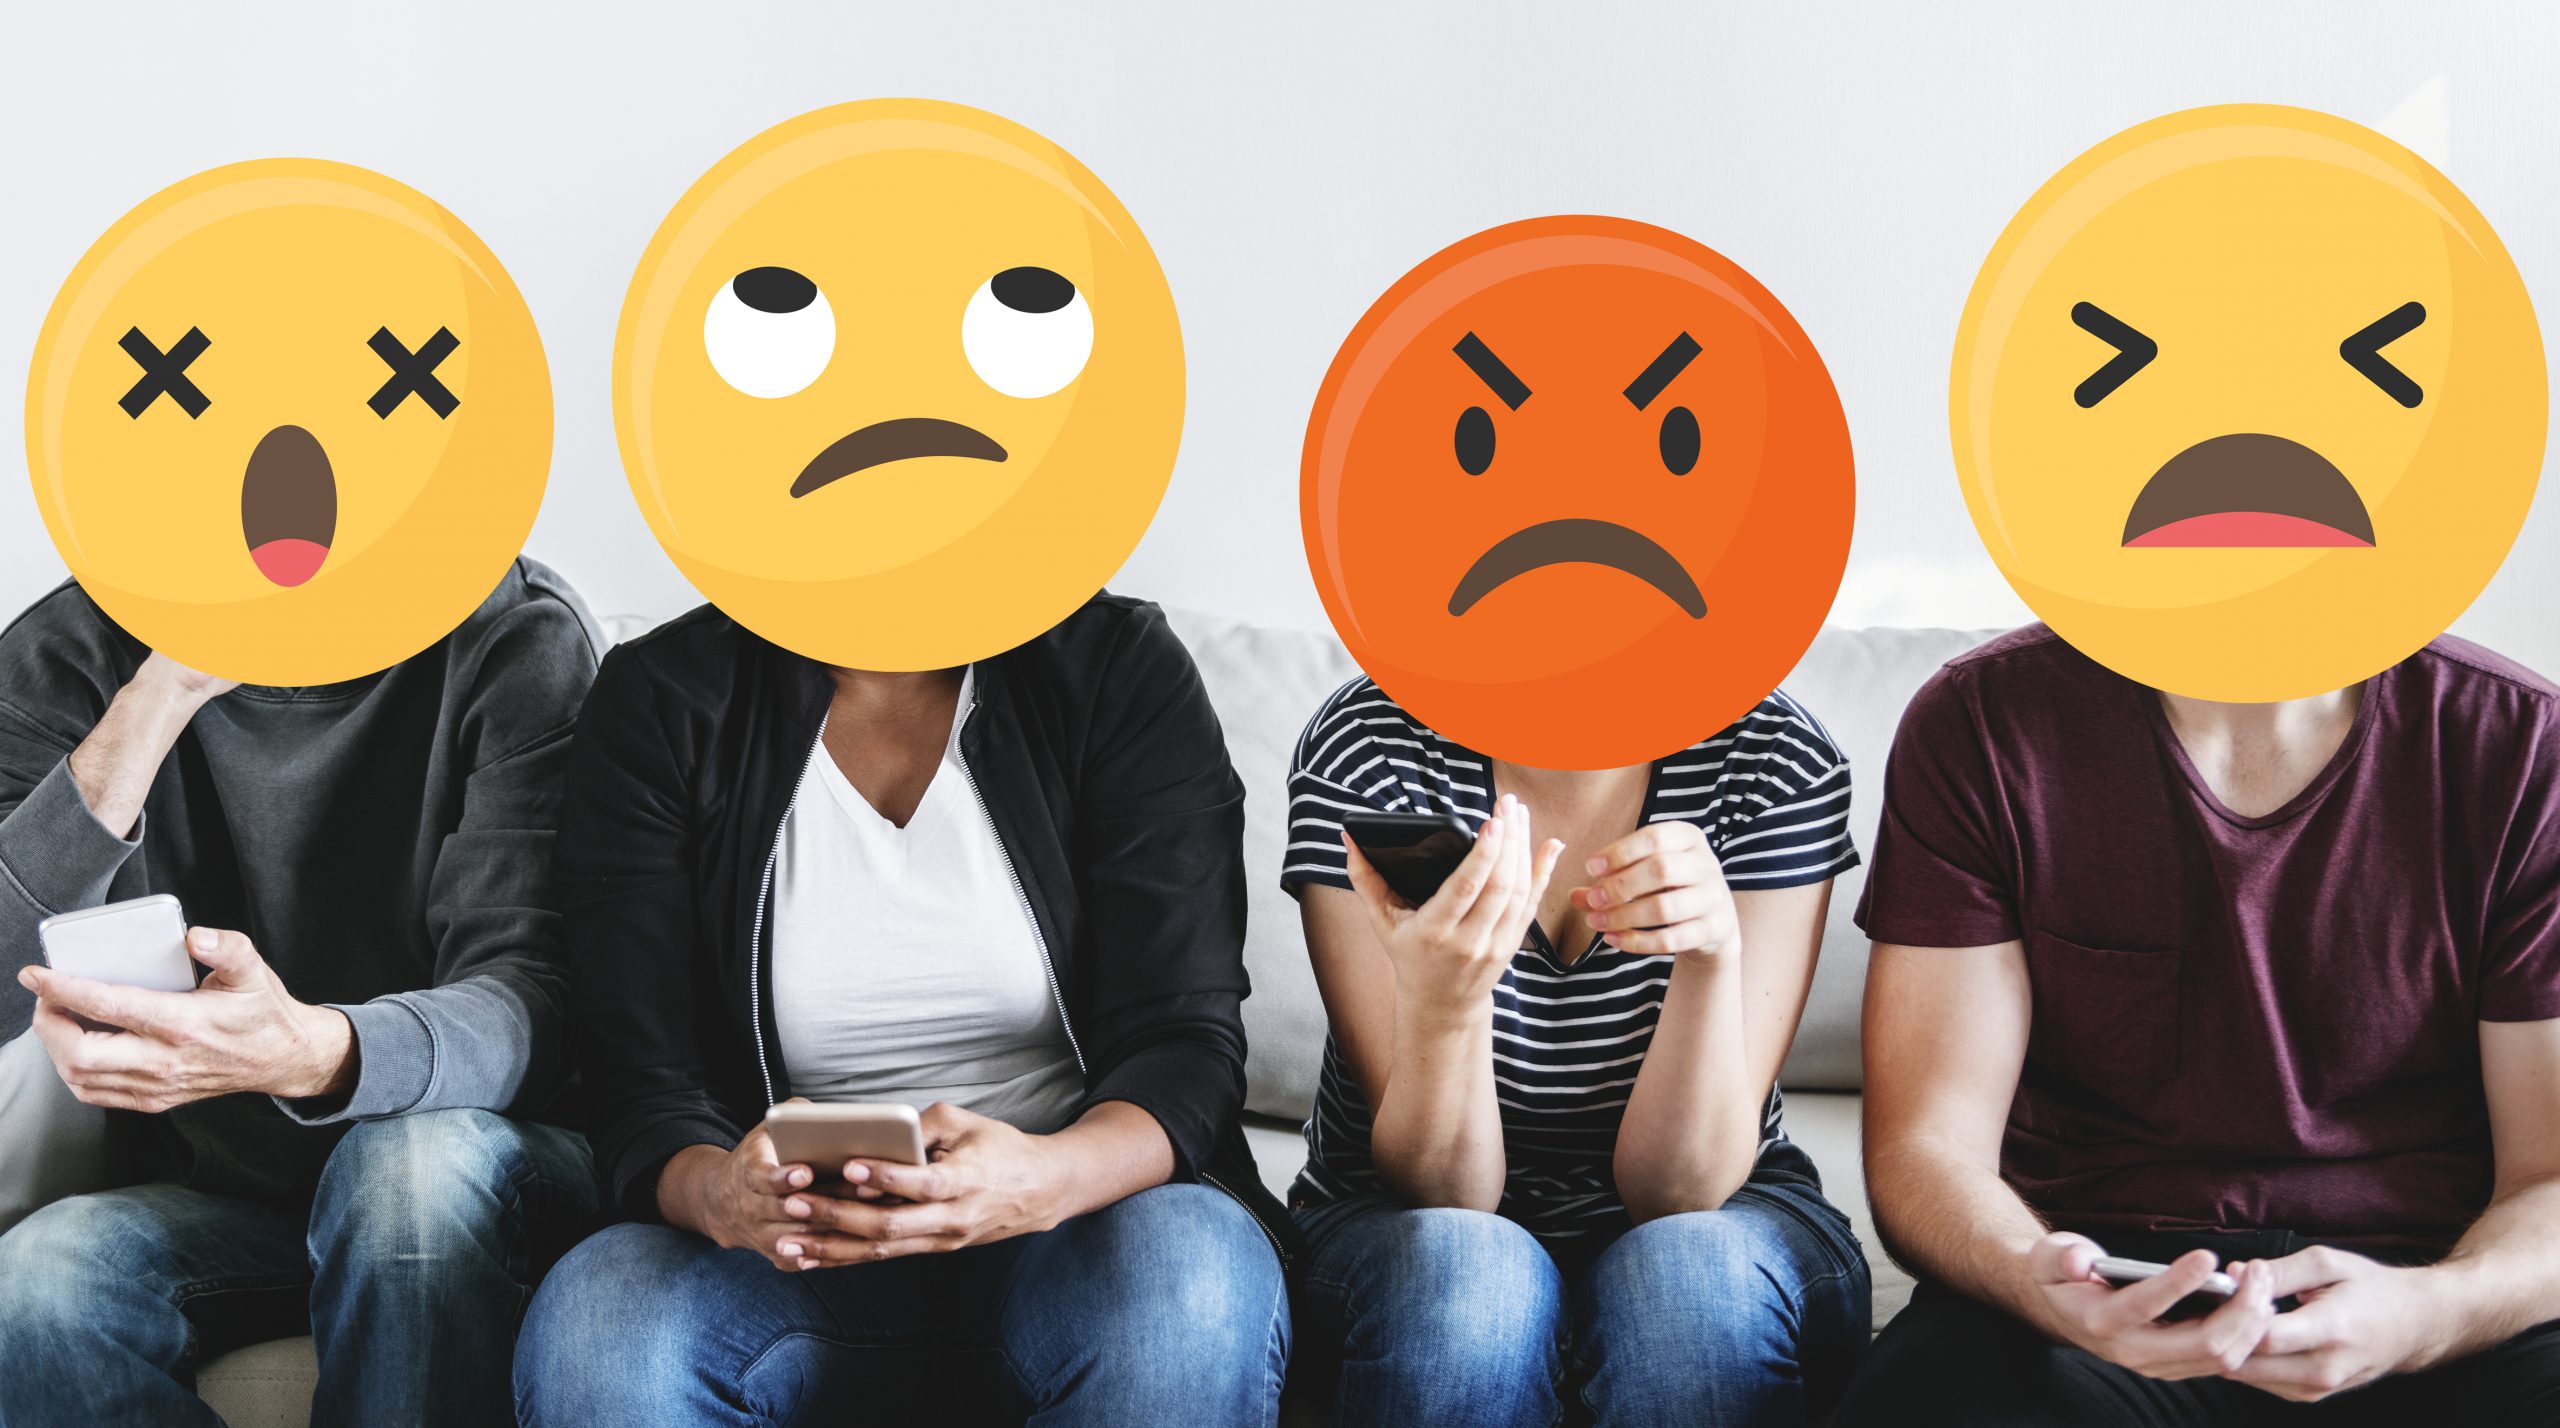 How to respond to negative comments on Social Media?